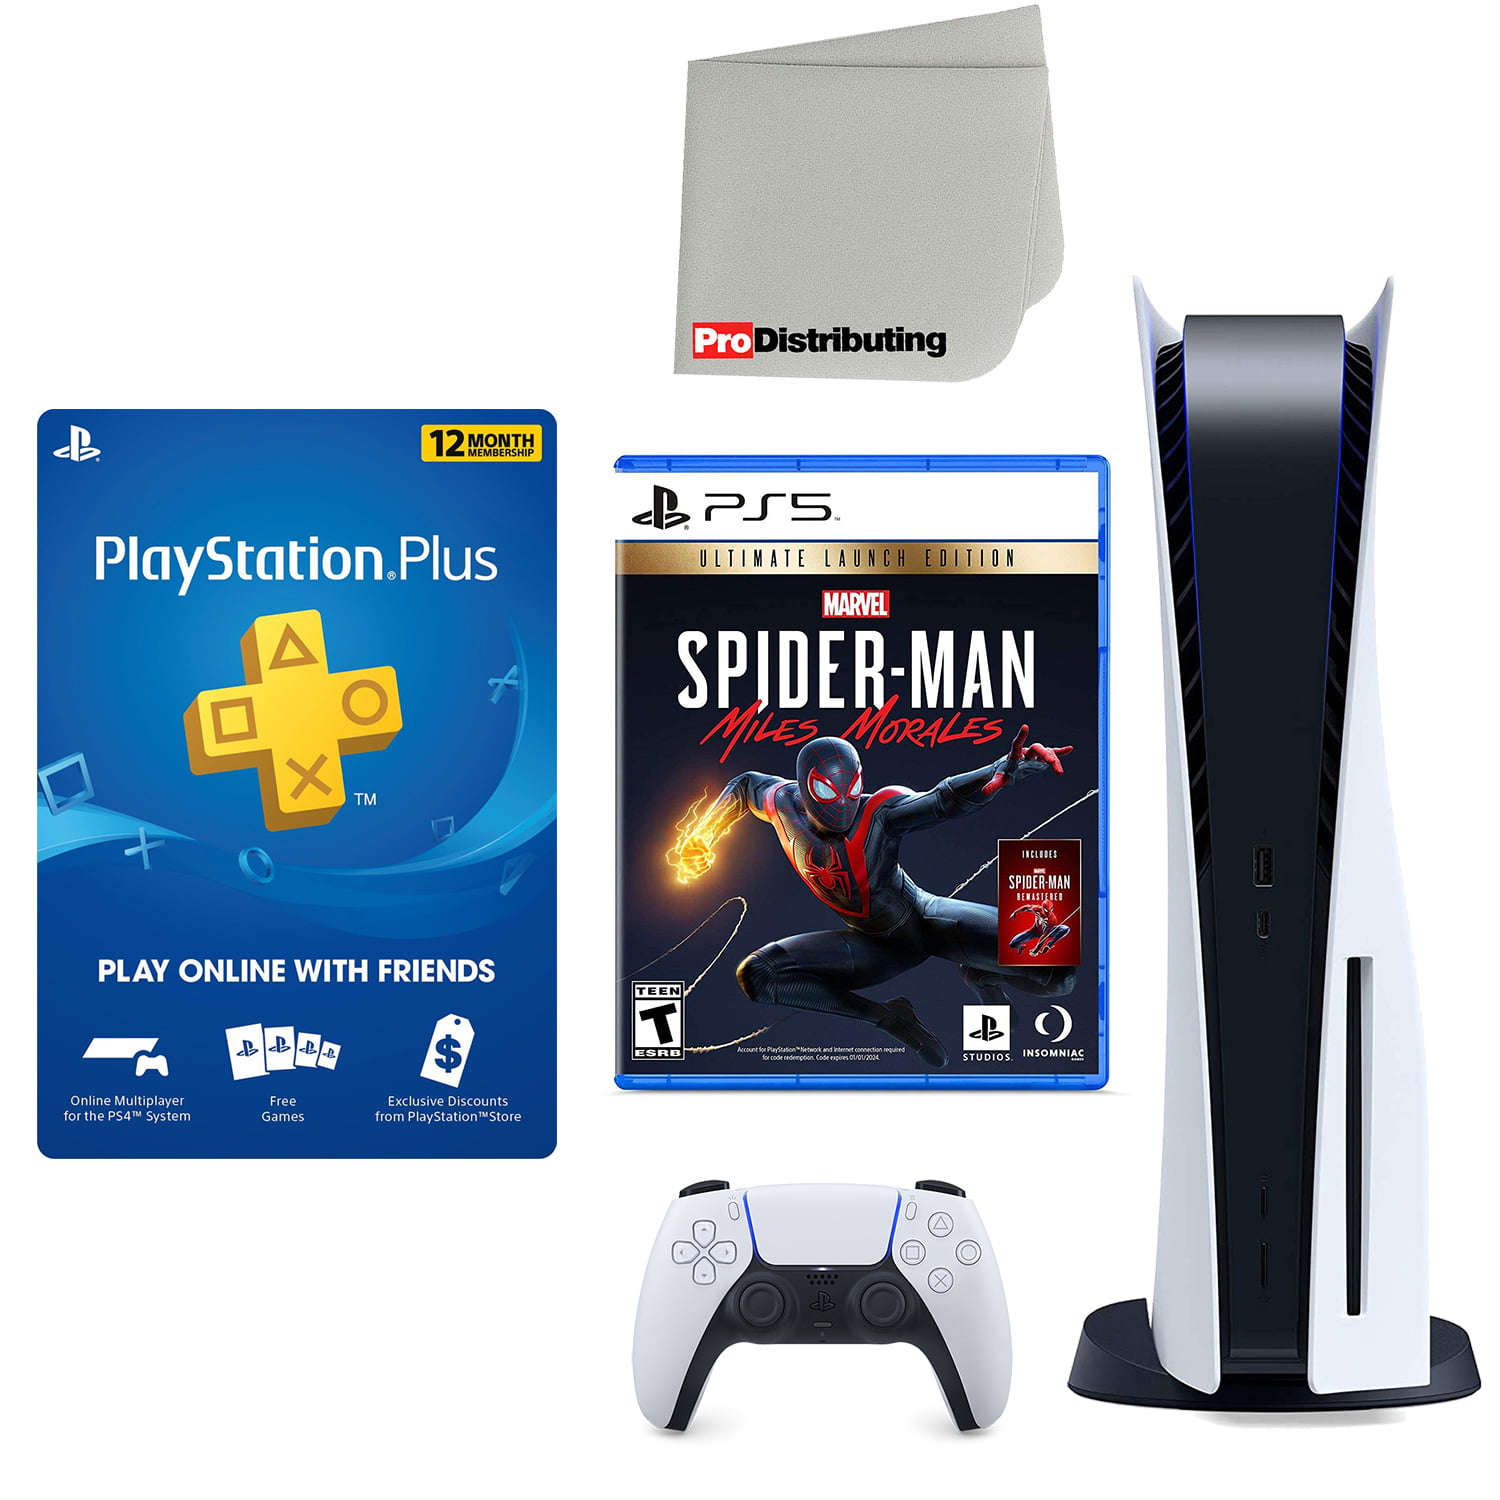 Sony PlayStation 5 Console (PS5 Disc Version) with Miles Morales Spiderman  and Accessories 